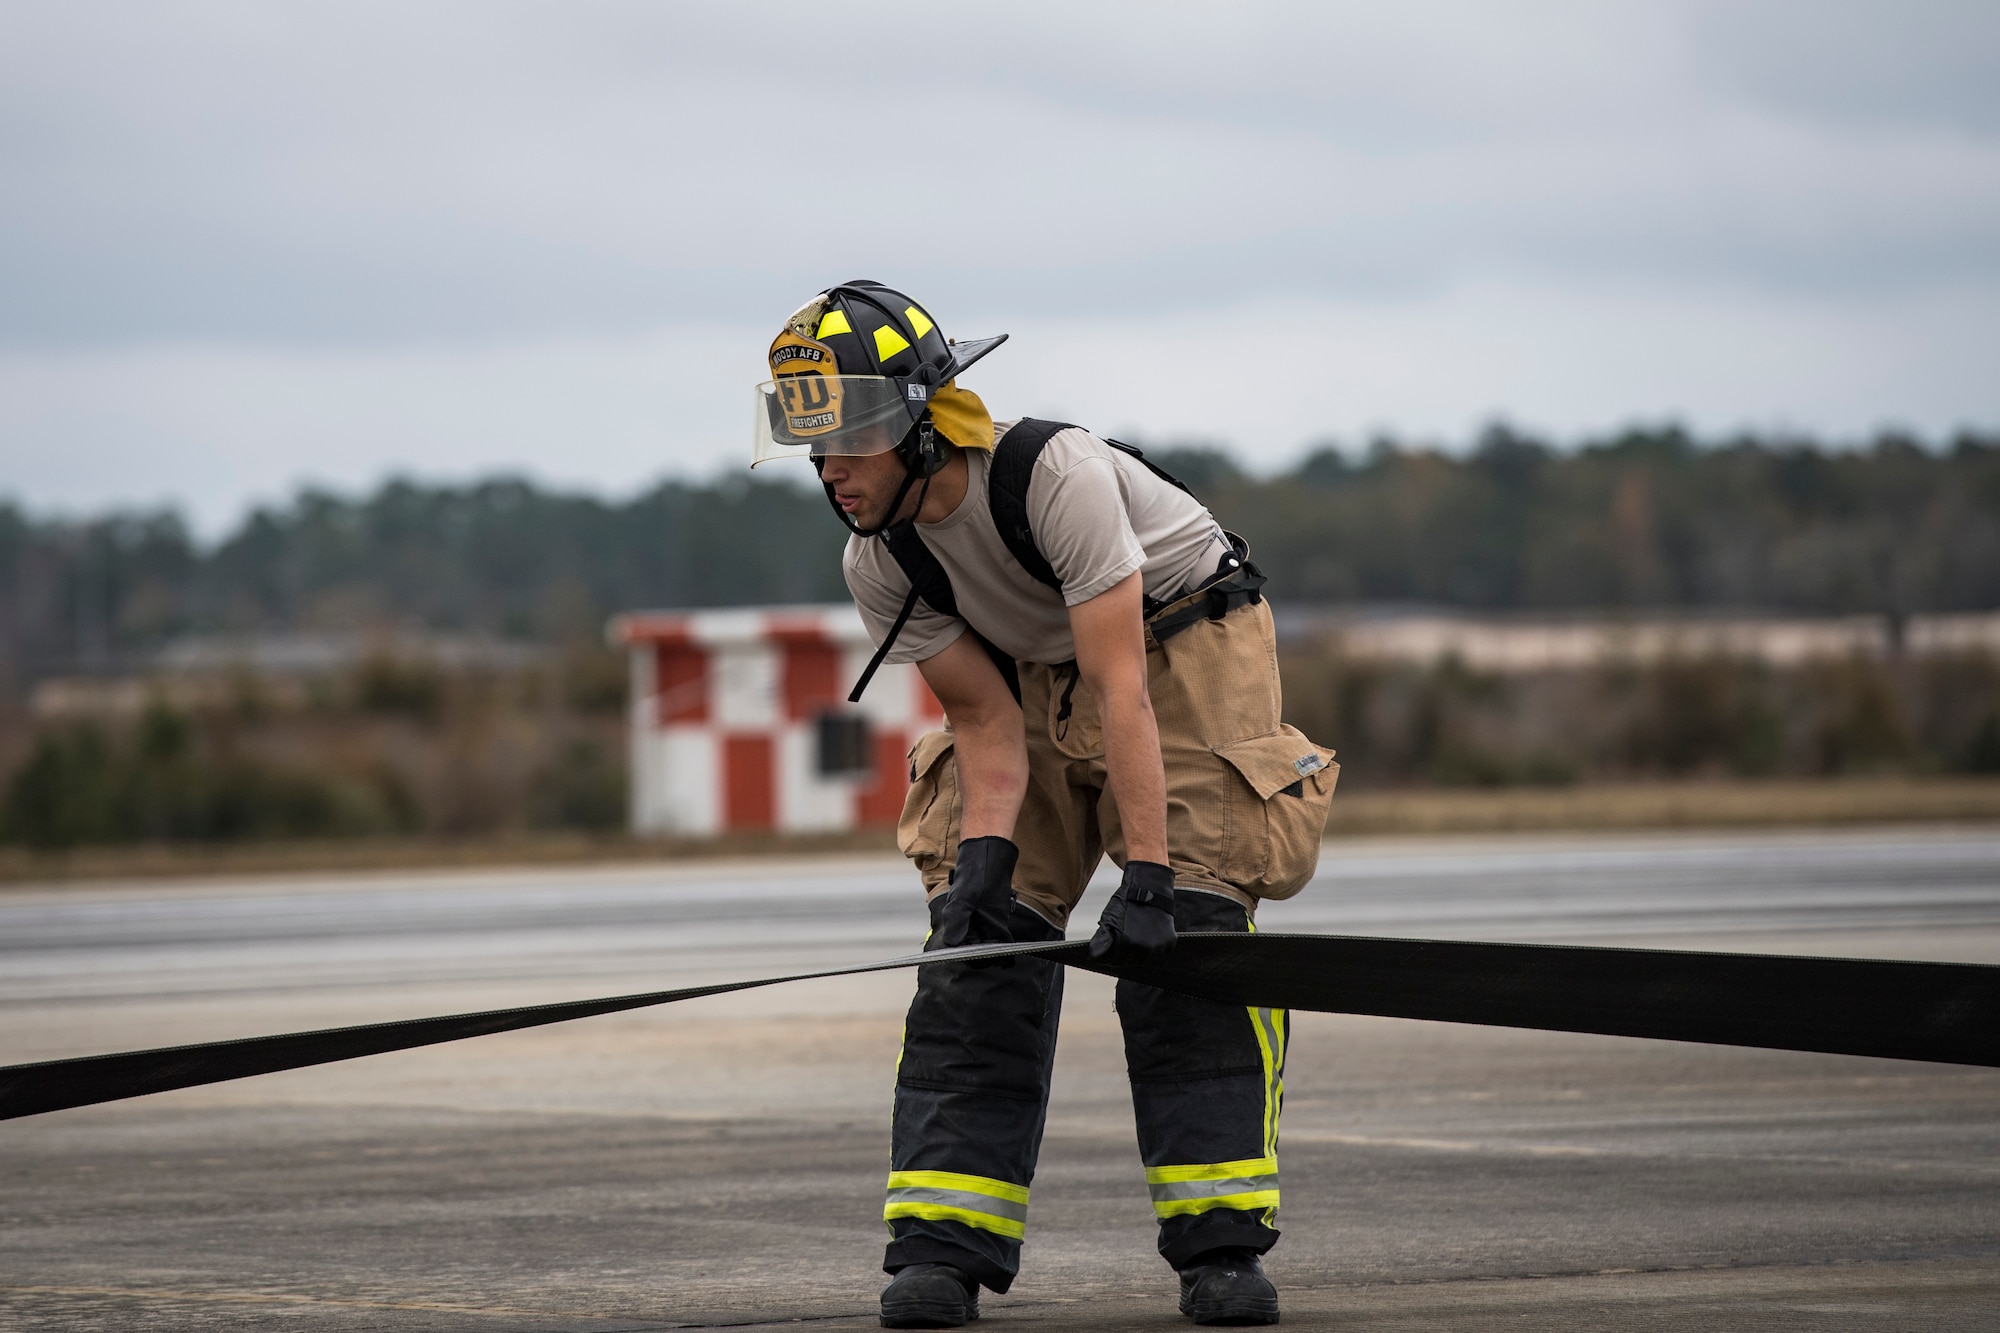 An Airman from the 23d Civil Engineer Squadron fire department prepares a cable to release an F-15C Eagle from an arresting system, Dec. 19, 2017, at Moody Air Force Base, Ga. The BAK-12 arresting system that is used on the runway to slow down fighter aircraft in emergency situations. The $250,000 system will now be completely replaced every 10 years. (U.S. Air Force photo by Senior Airman Janiqua P. Robinson)